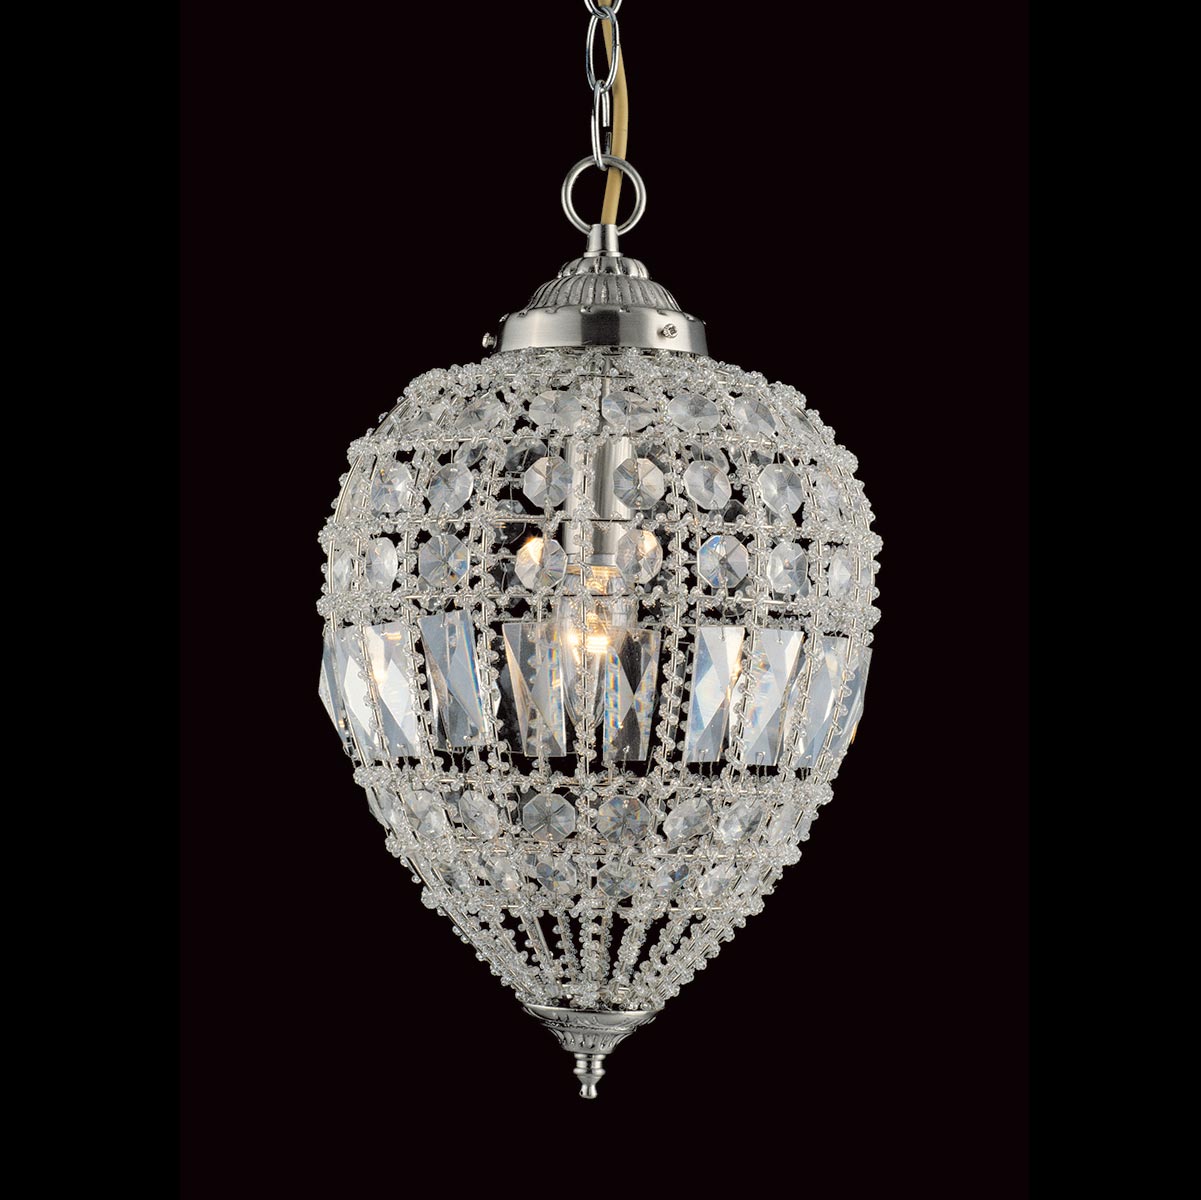 Impex Bombay Large 1 Light Moroccan Style Crystal Pendant Satin Nickel